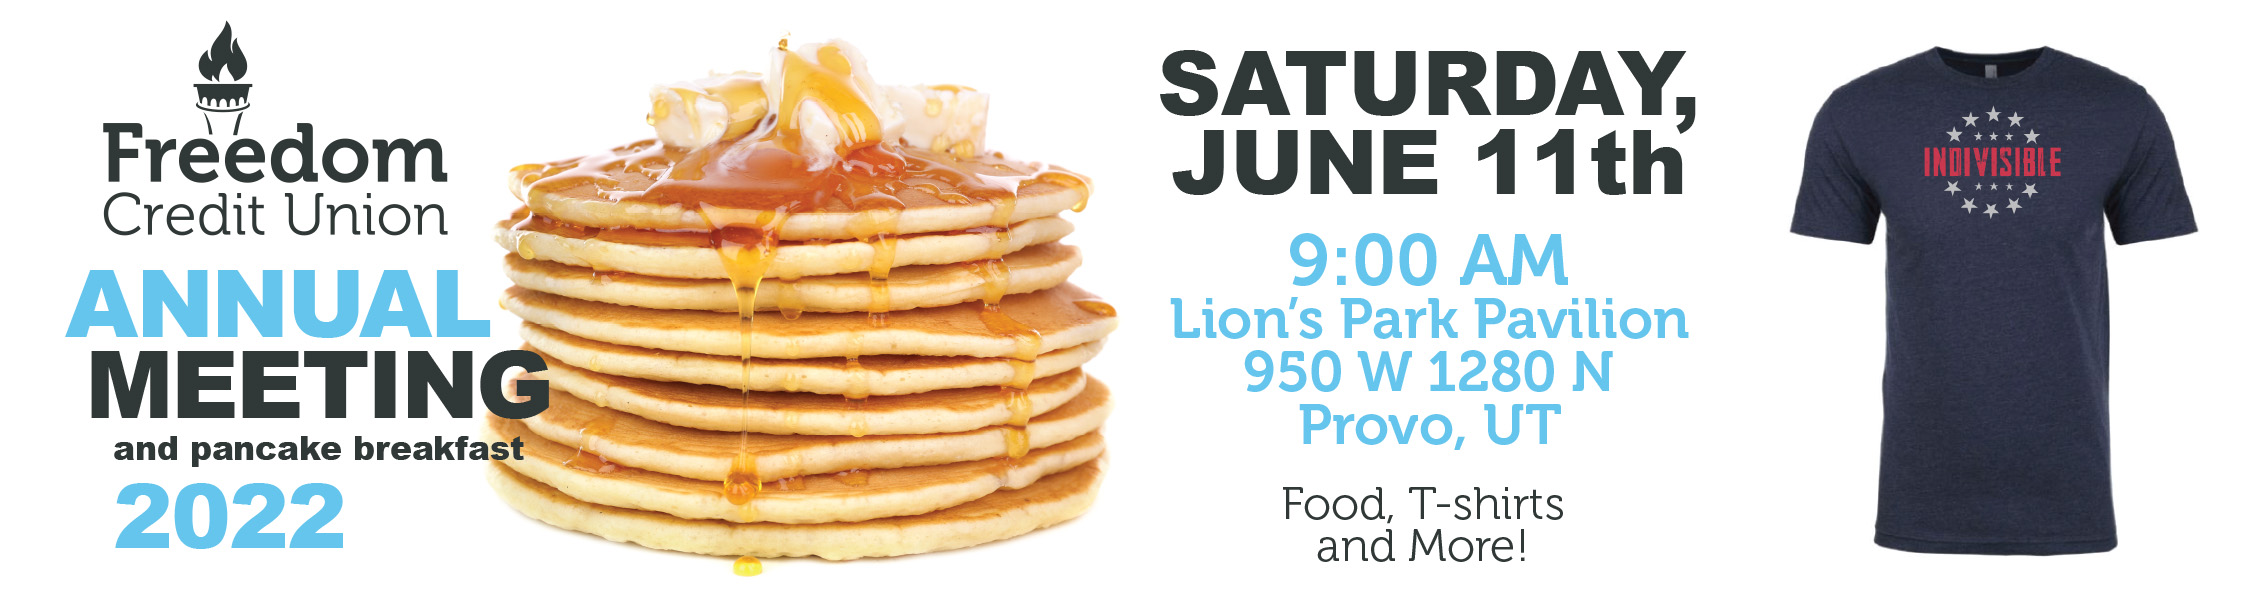 Freedome Credit Union Annual Meeting and pancake breakfast 2022 Saturday June 11th 9:00am Lion's park pavilion 950 w 1280 N Provo, UT Food, T-shirts and More!